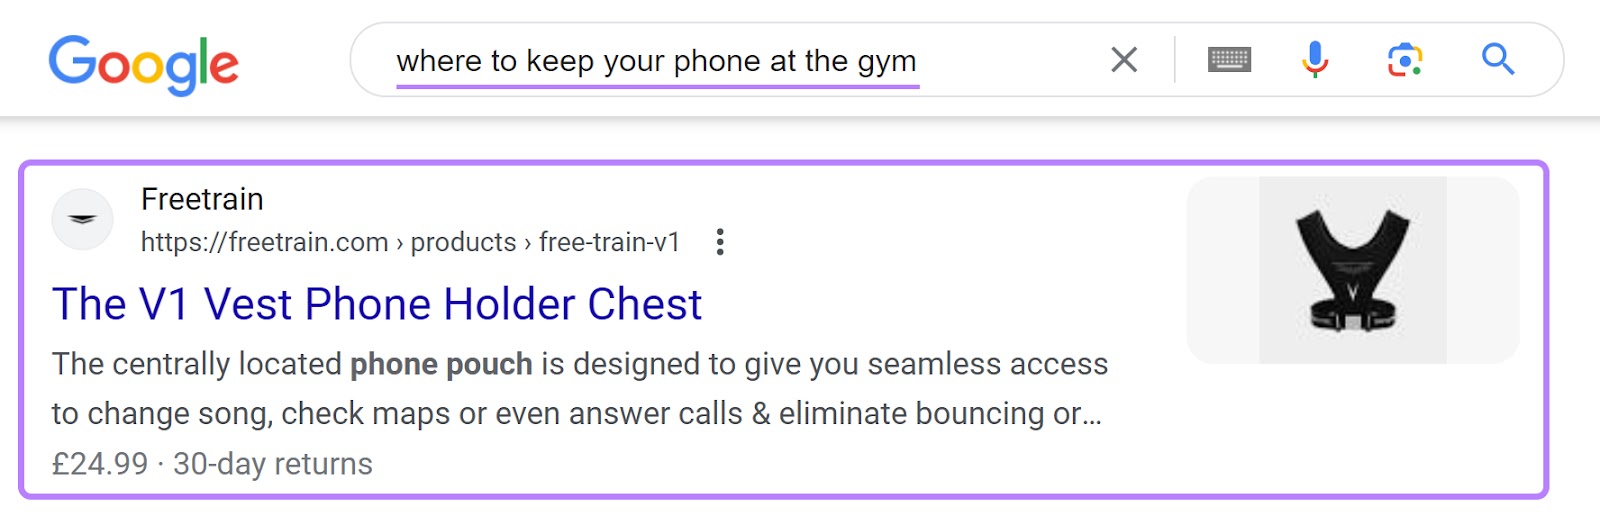 Freetrain's result on Google SERP for “where to keep your p،ne at the gym” query